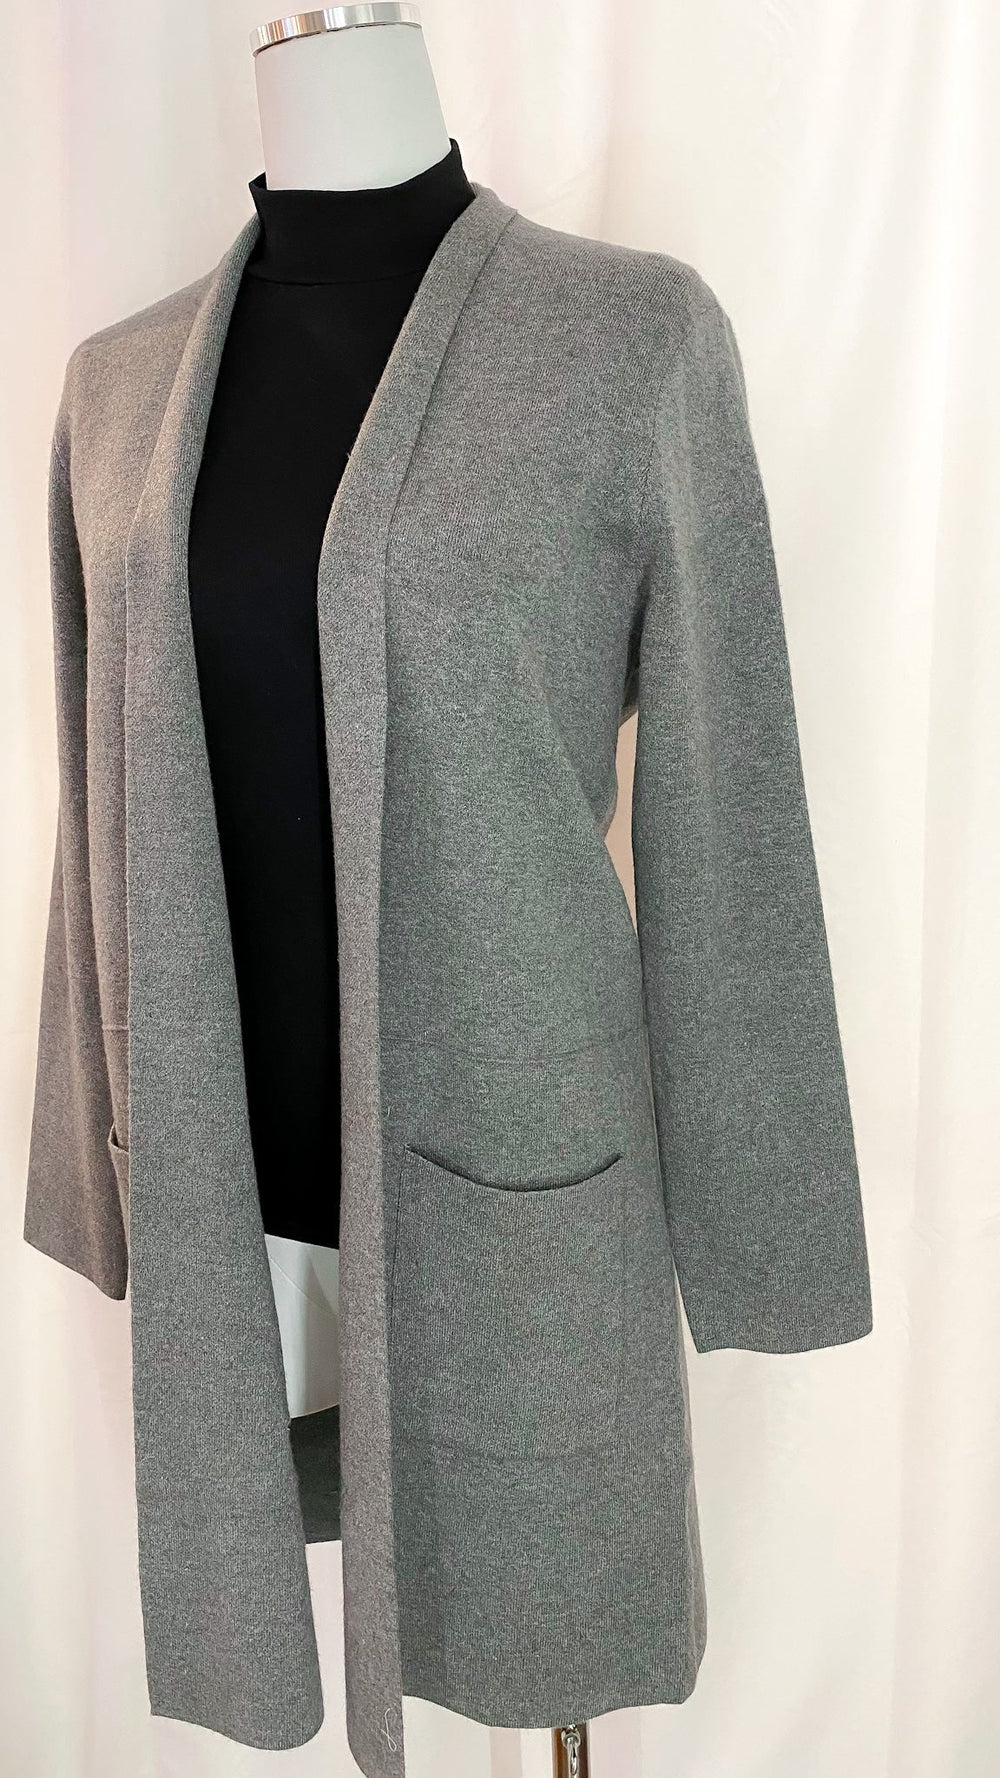 On Time Charcoal Knit Coat - Coats & Jackets